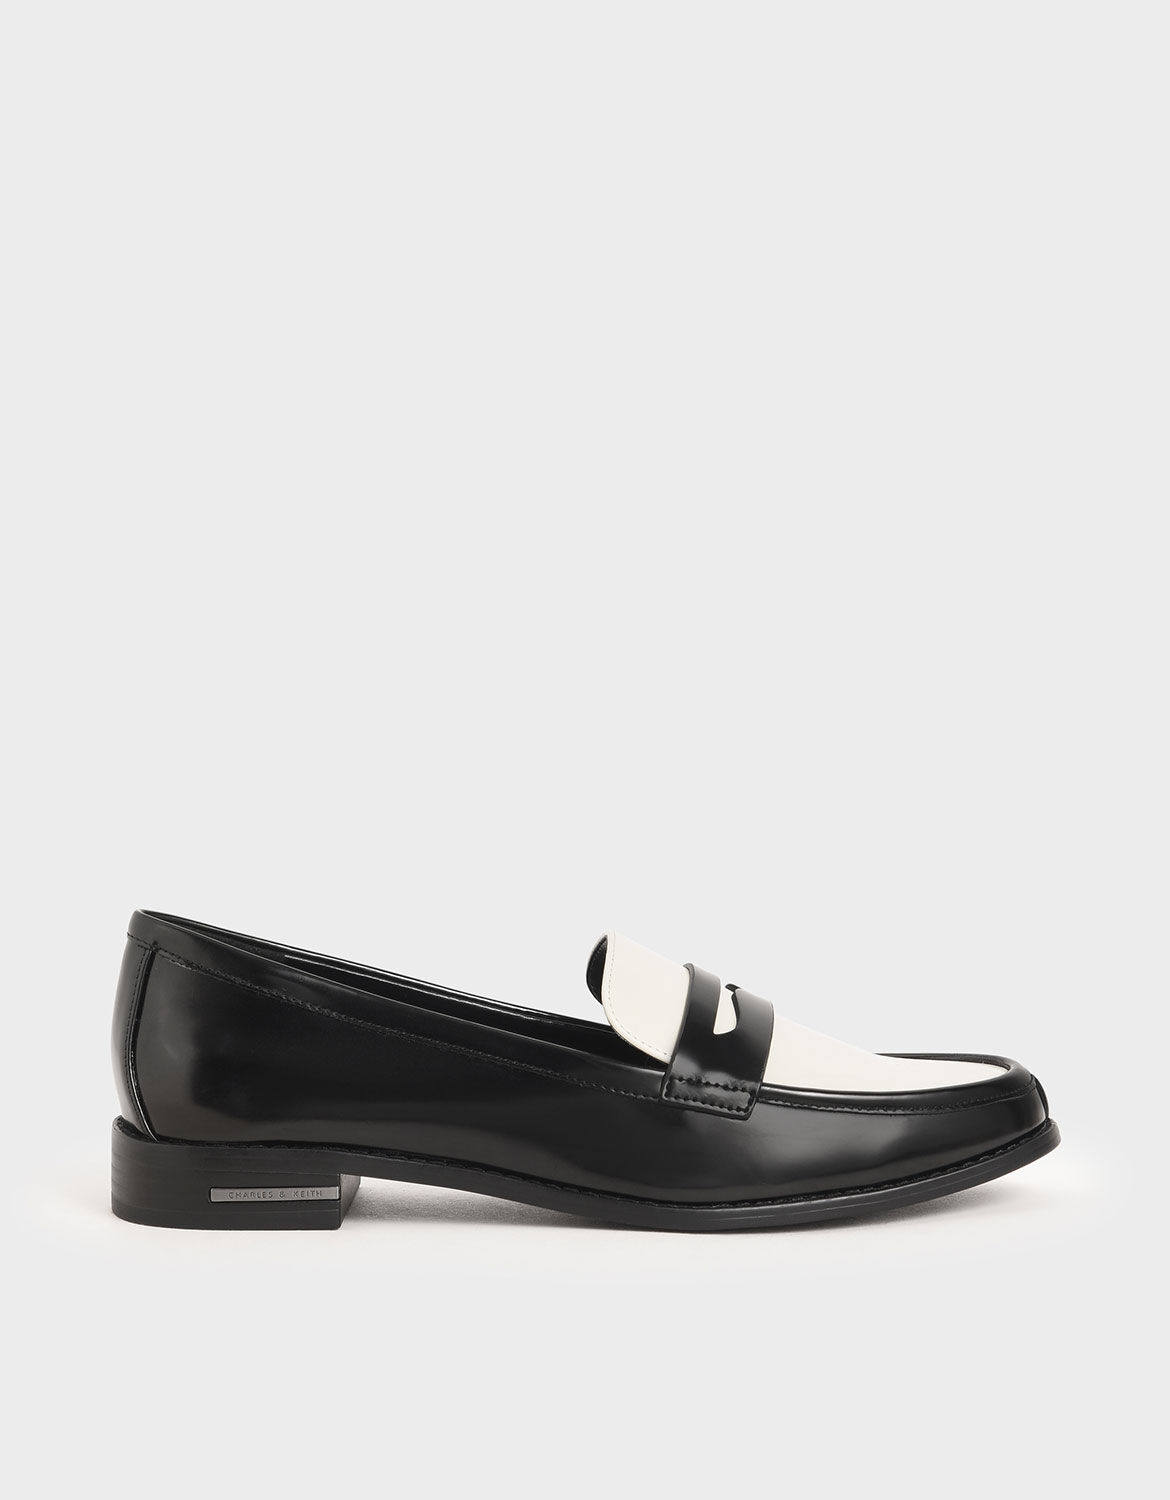 white and black penny loafers